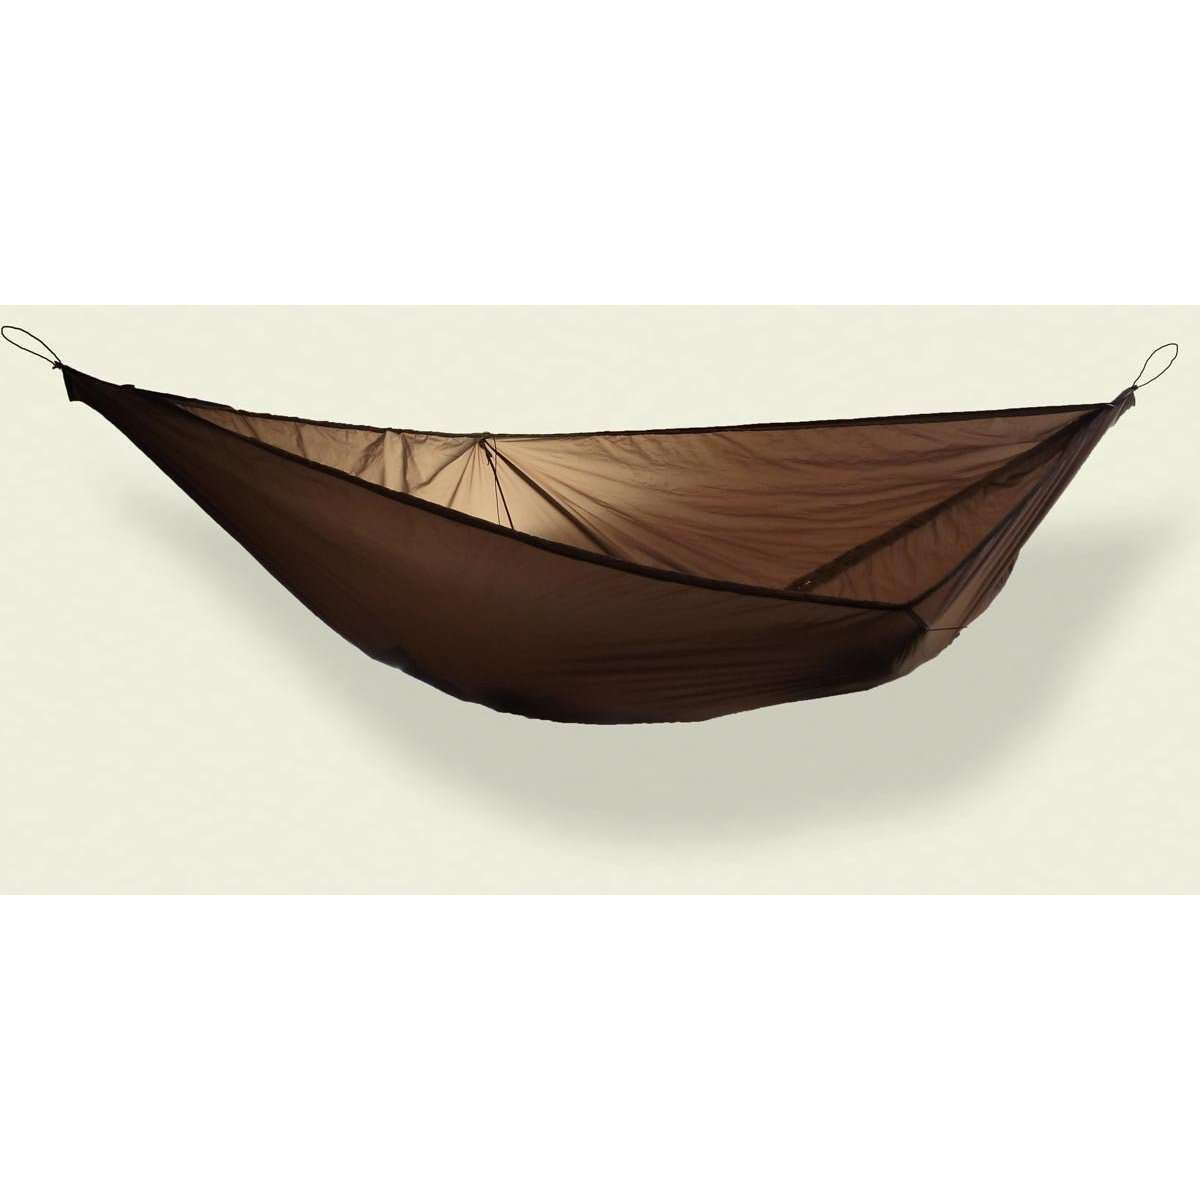 Hennessy Hammock, Hennessy Hammock - Replacement Classic UnderCover, Hammock Quilts & Under Blankets,Wylies Outdoor World,